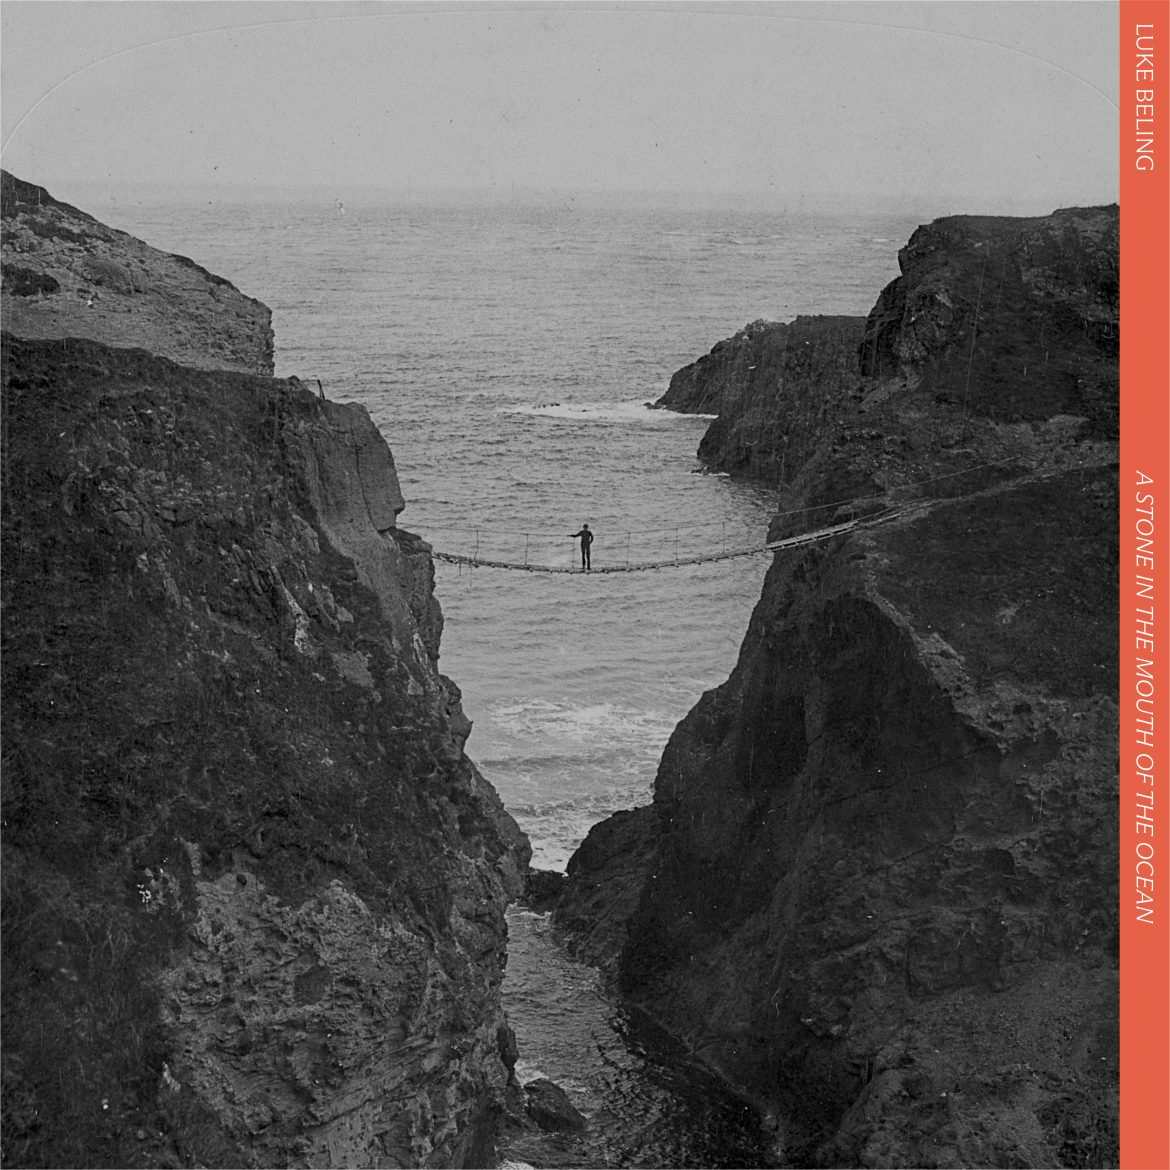 Navigating Human Vulnerability Amidst the Cosmic Expanse: Luke Beling’s New Single ‘A Stone in the Mouth of the Ocean’.